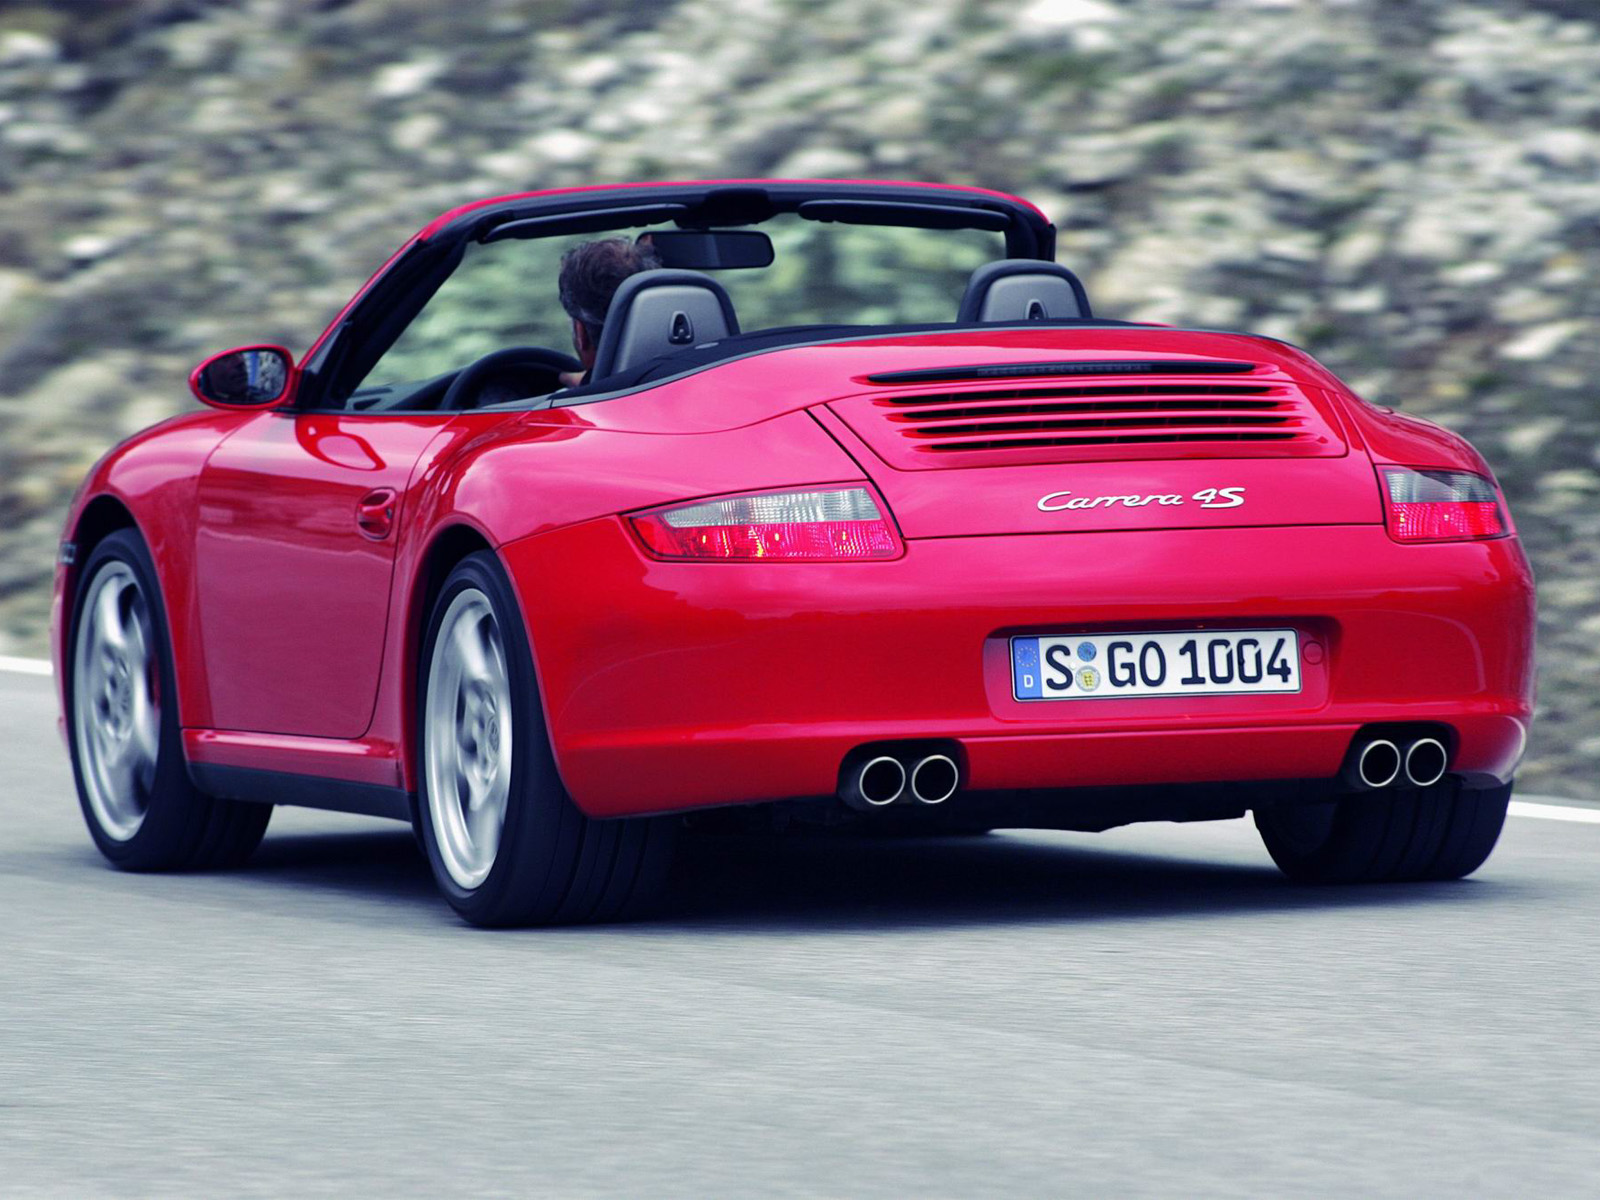 Porsche 997 911 Carrera 4S Cabriolet Cars Wallpapers | Car Pictures ...